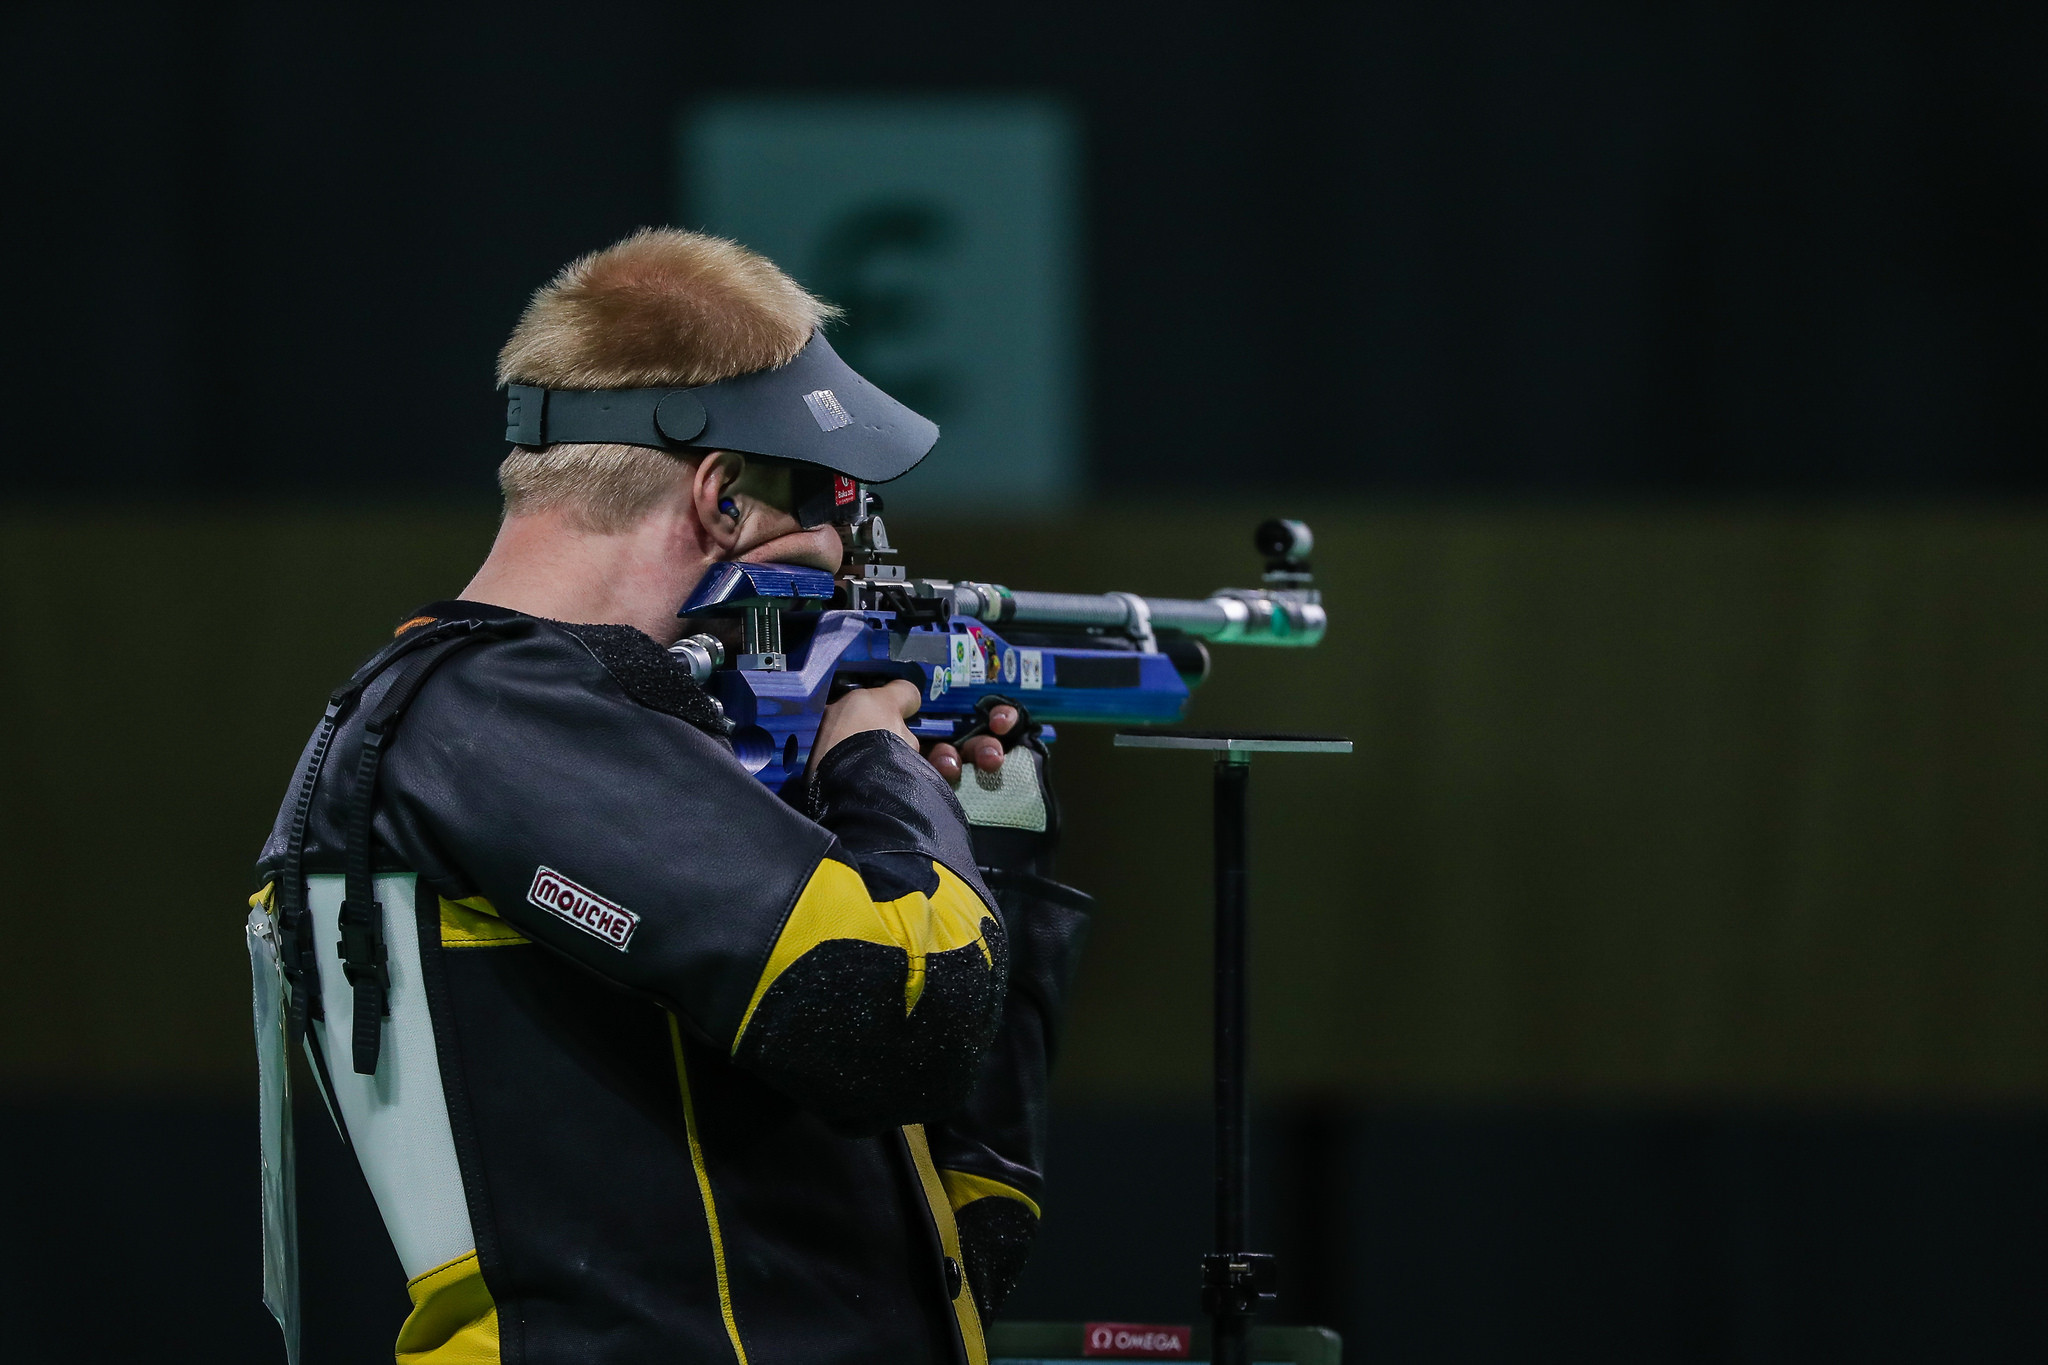 An all-event package for shooting shotgun and shooting rifle and pistol events at the 2019 European Games in Minsk has gone on sale due to high demand for tickets ©Minsk 2019